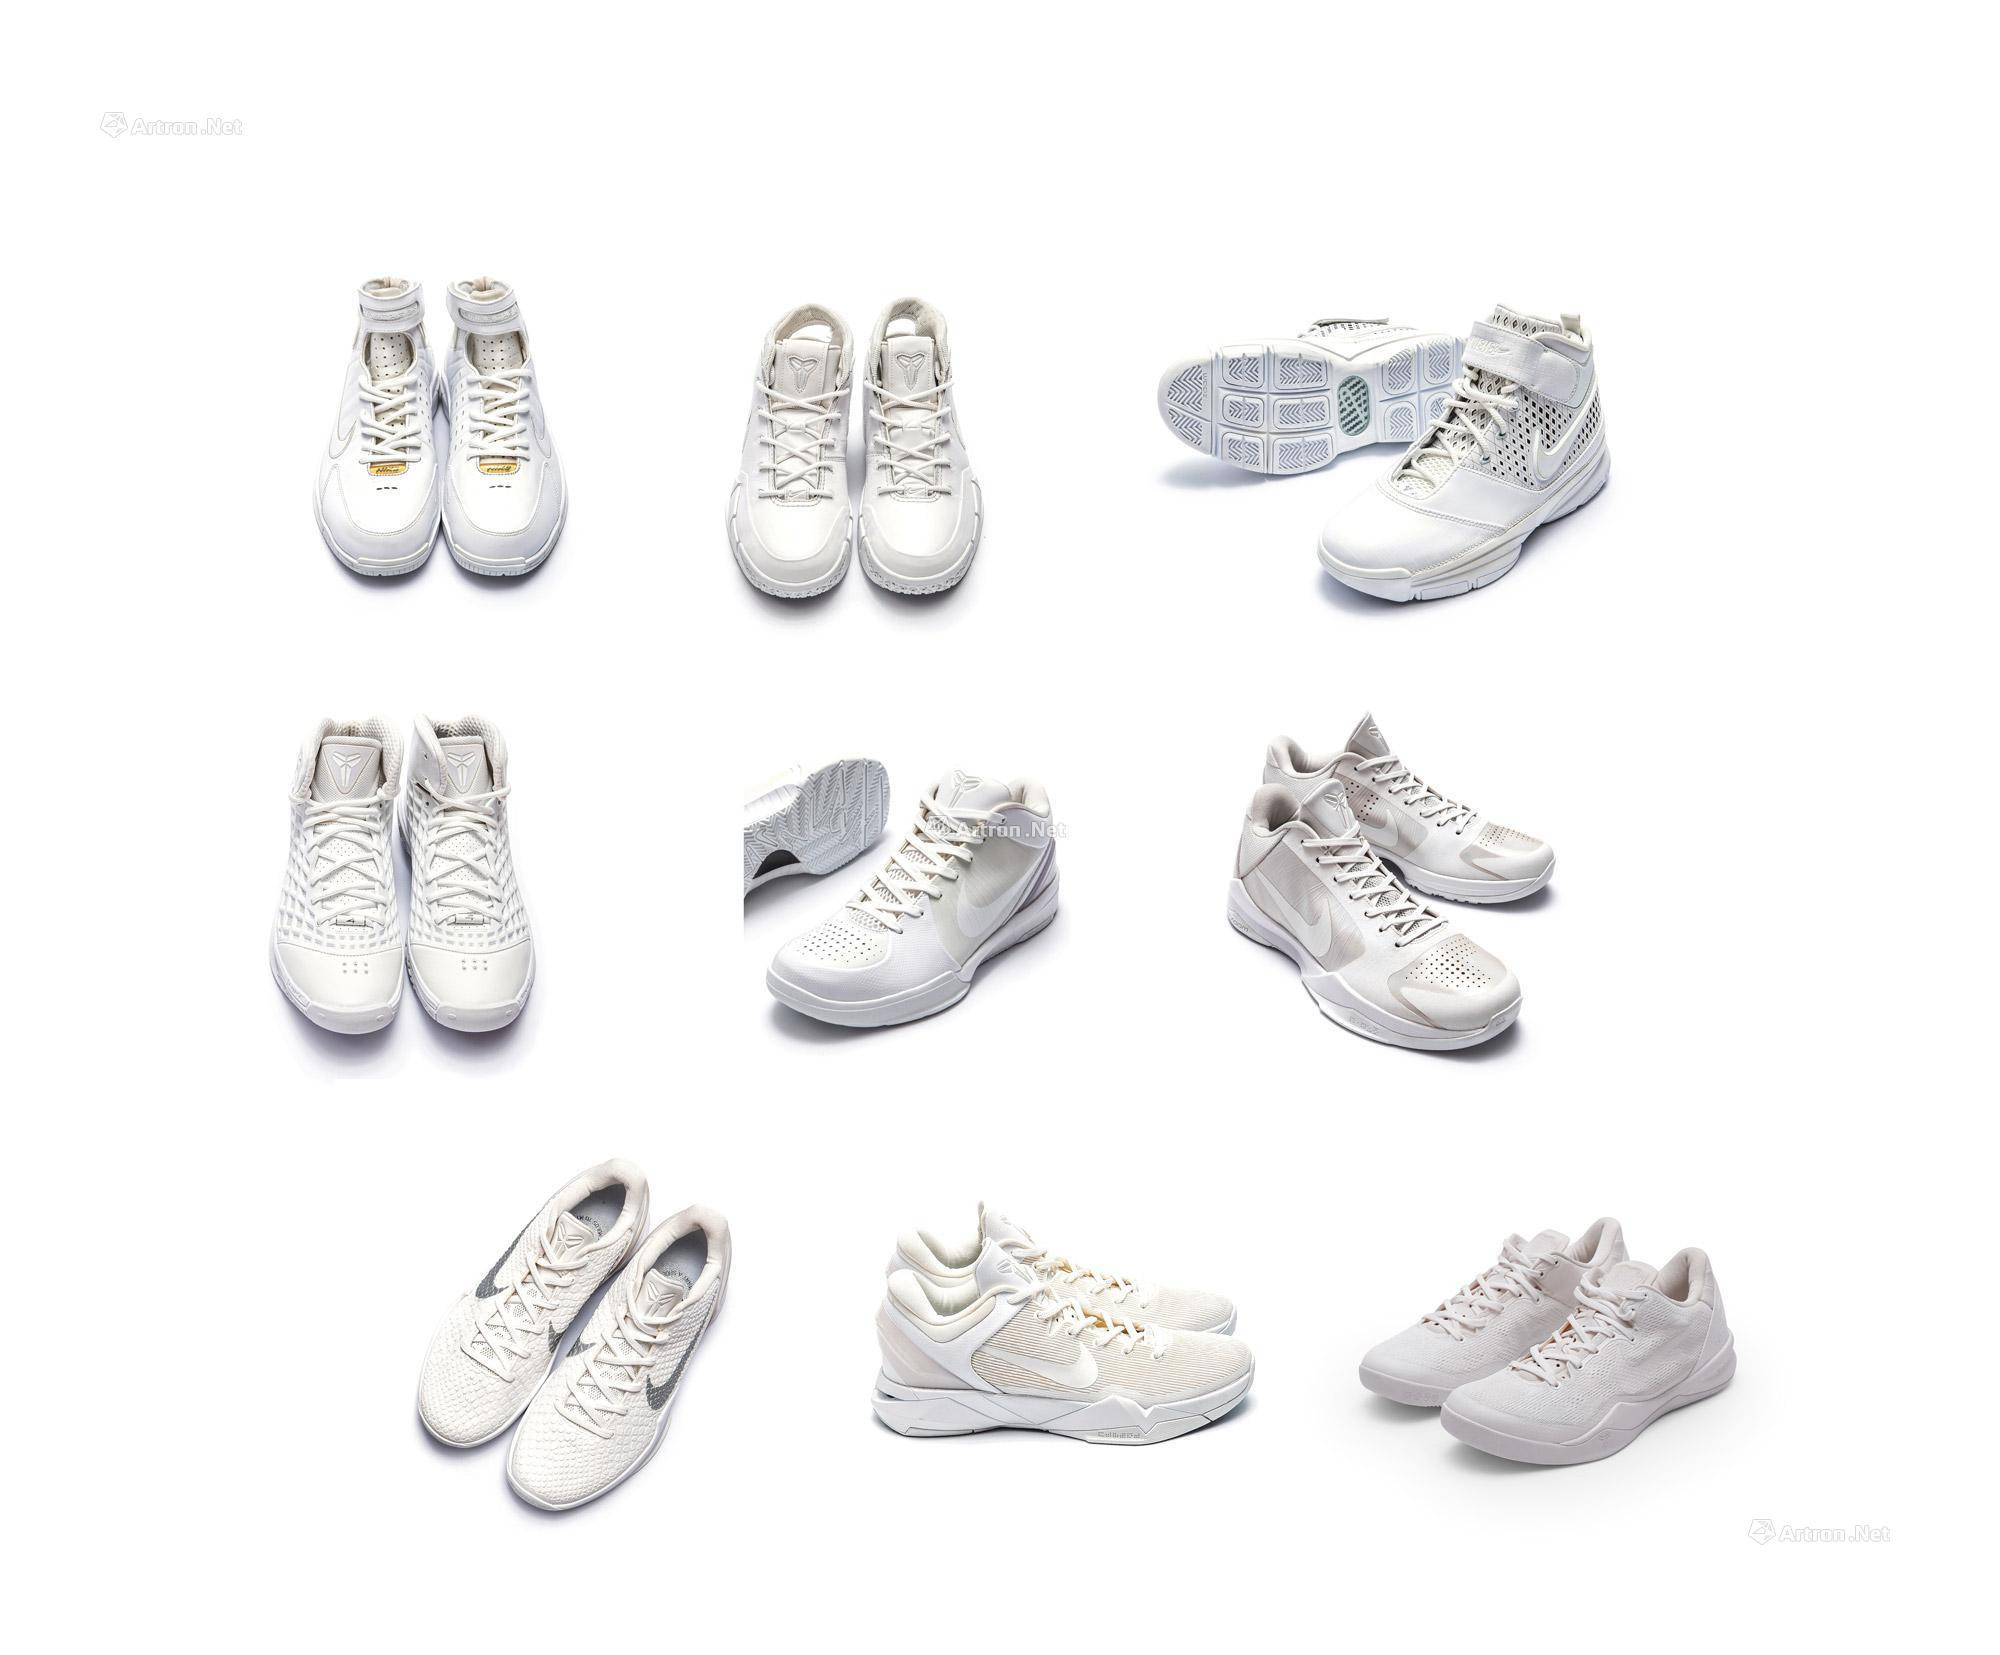 Kobe Bryant All White Sneaker Collection  9 Pairs of Exclusive Sneakers